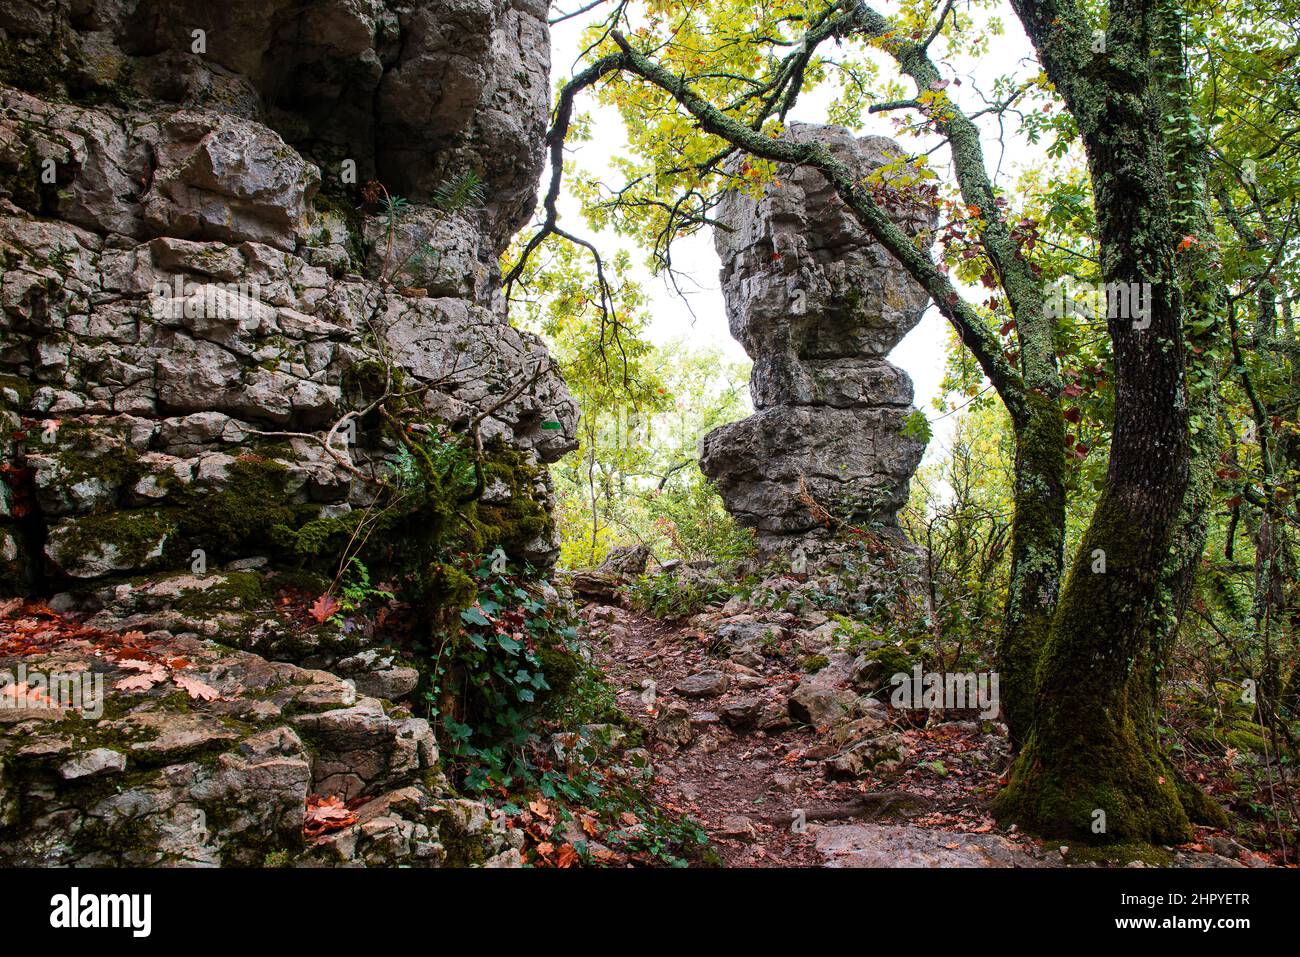 Rock of Paiolive forest, sensitive natural area, Ardeche, France Stock Photo